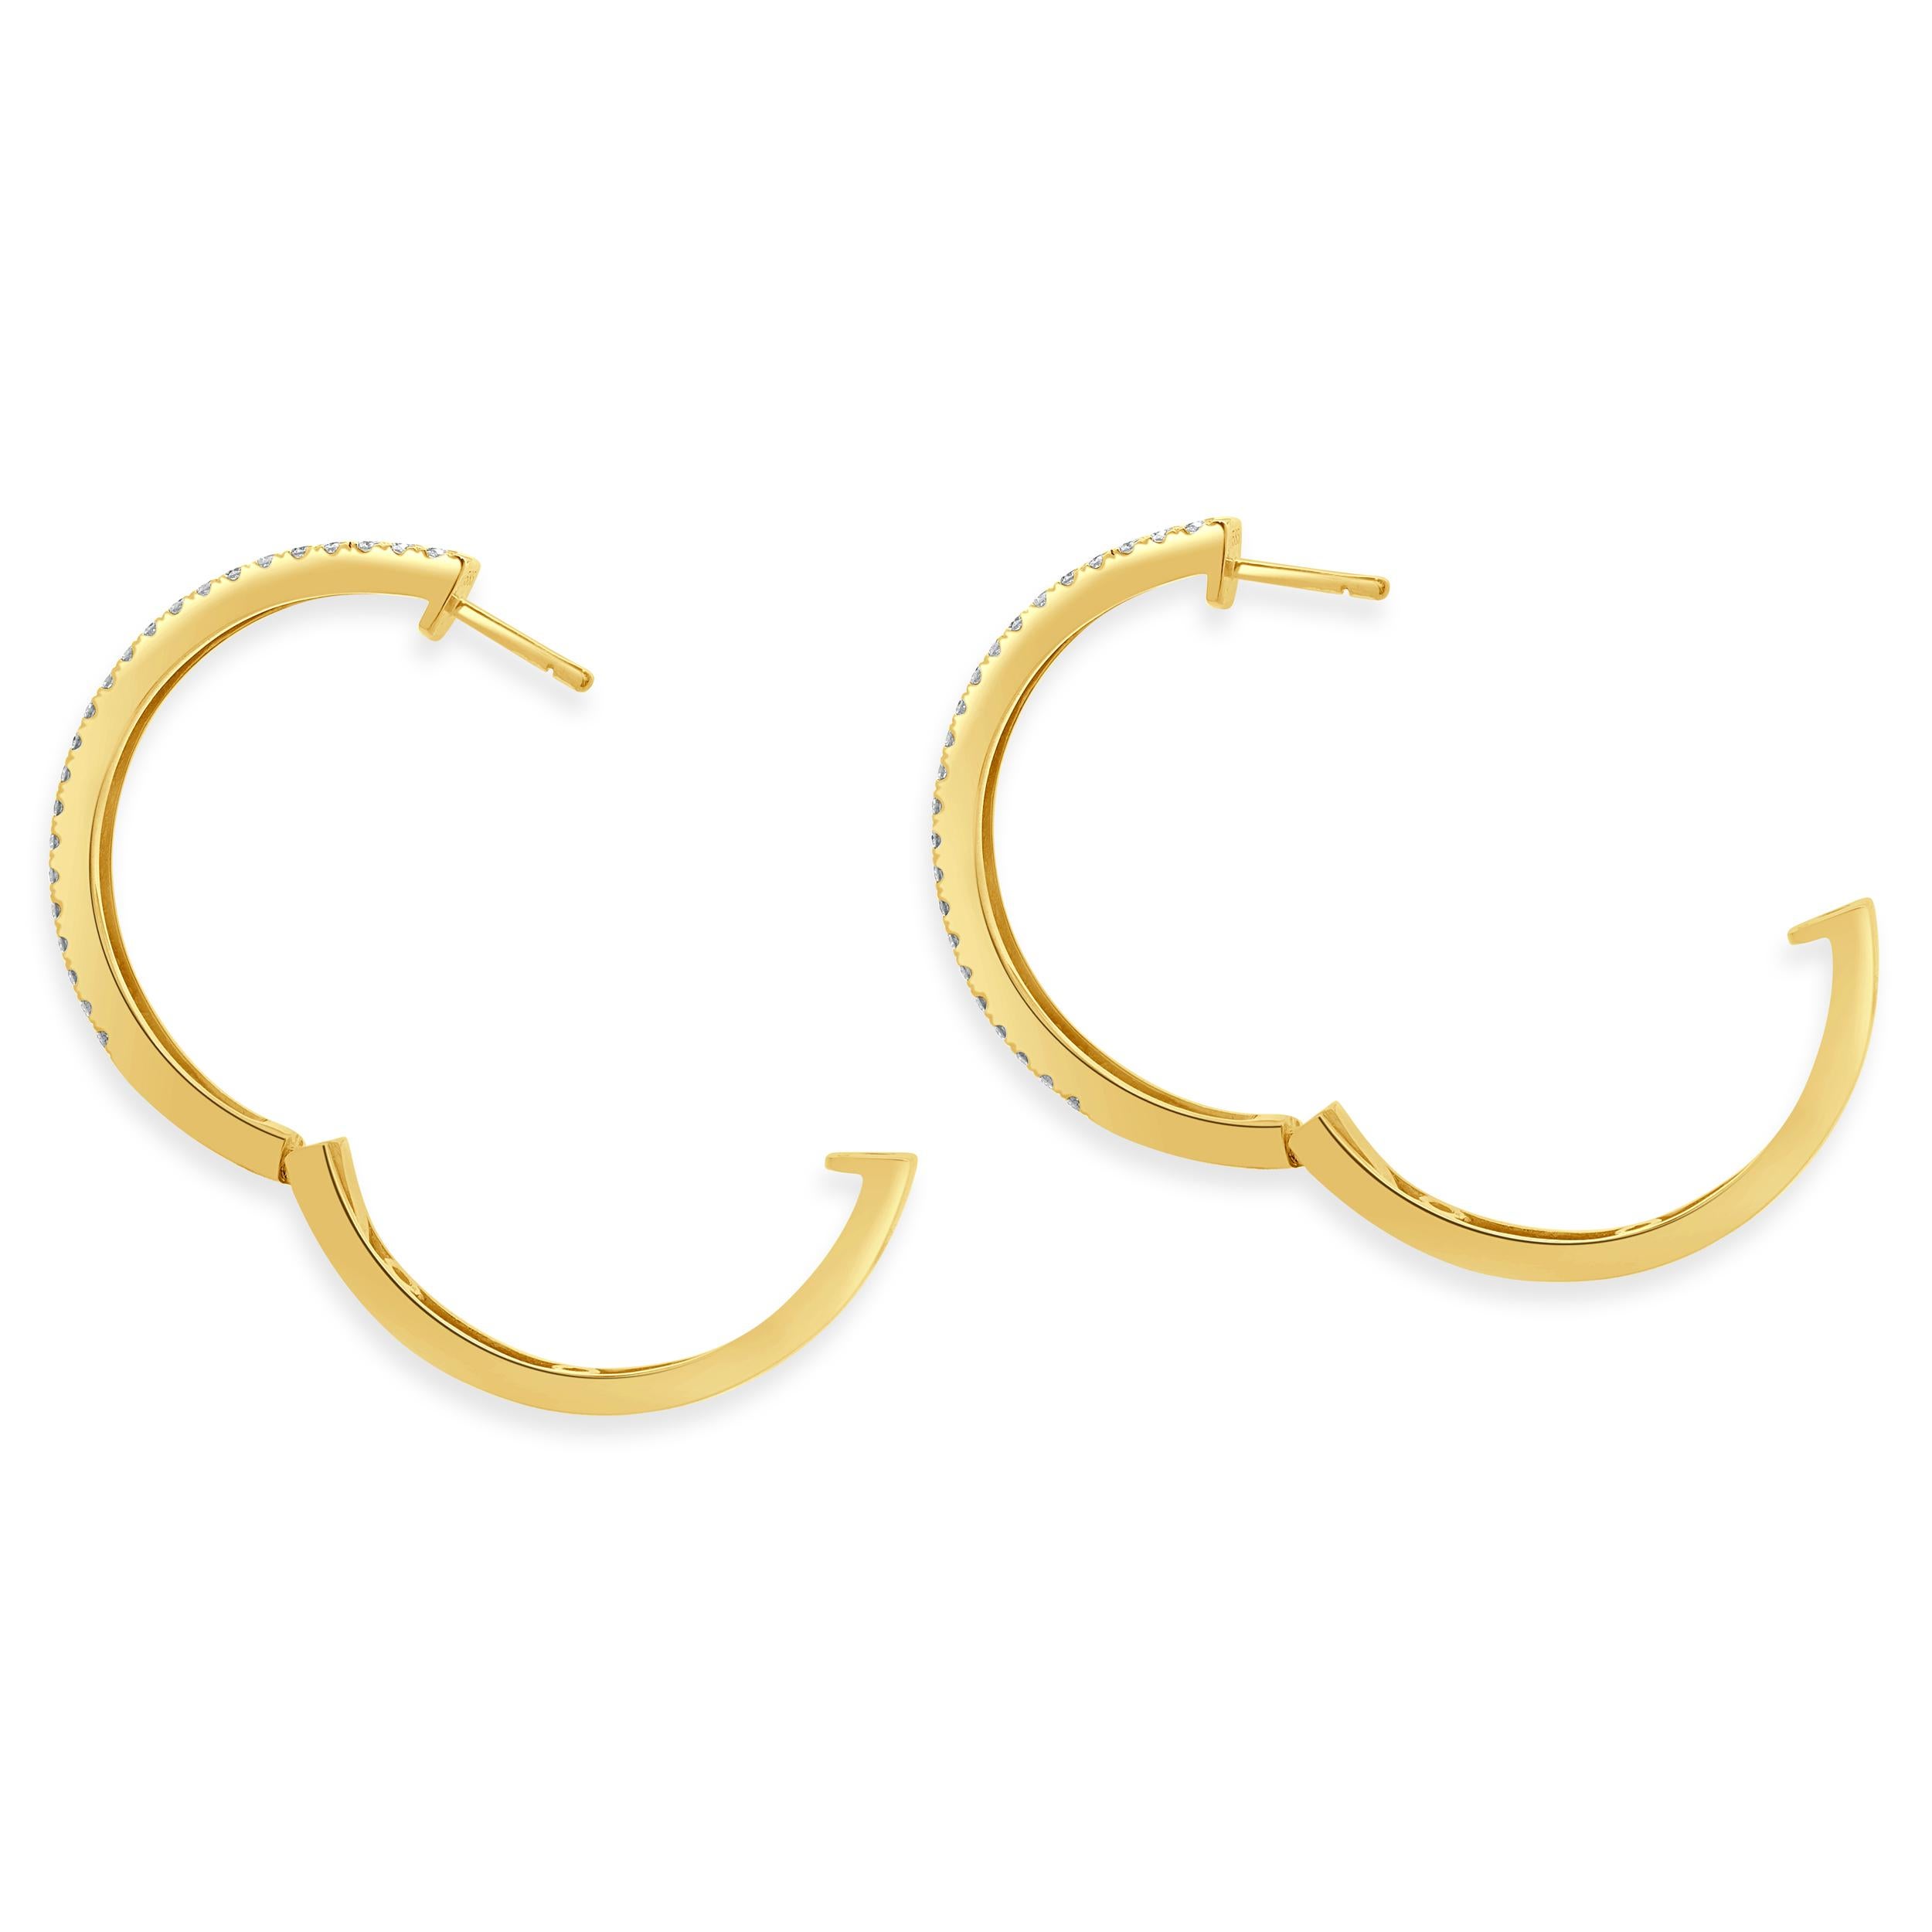 14 Karat Yellow Gold Double Row Diamond Hoop Earrings In Excellent Condition For Sale In Scottsdale, AZ